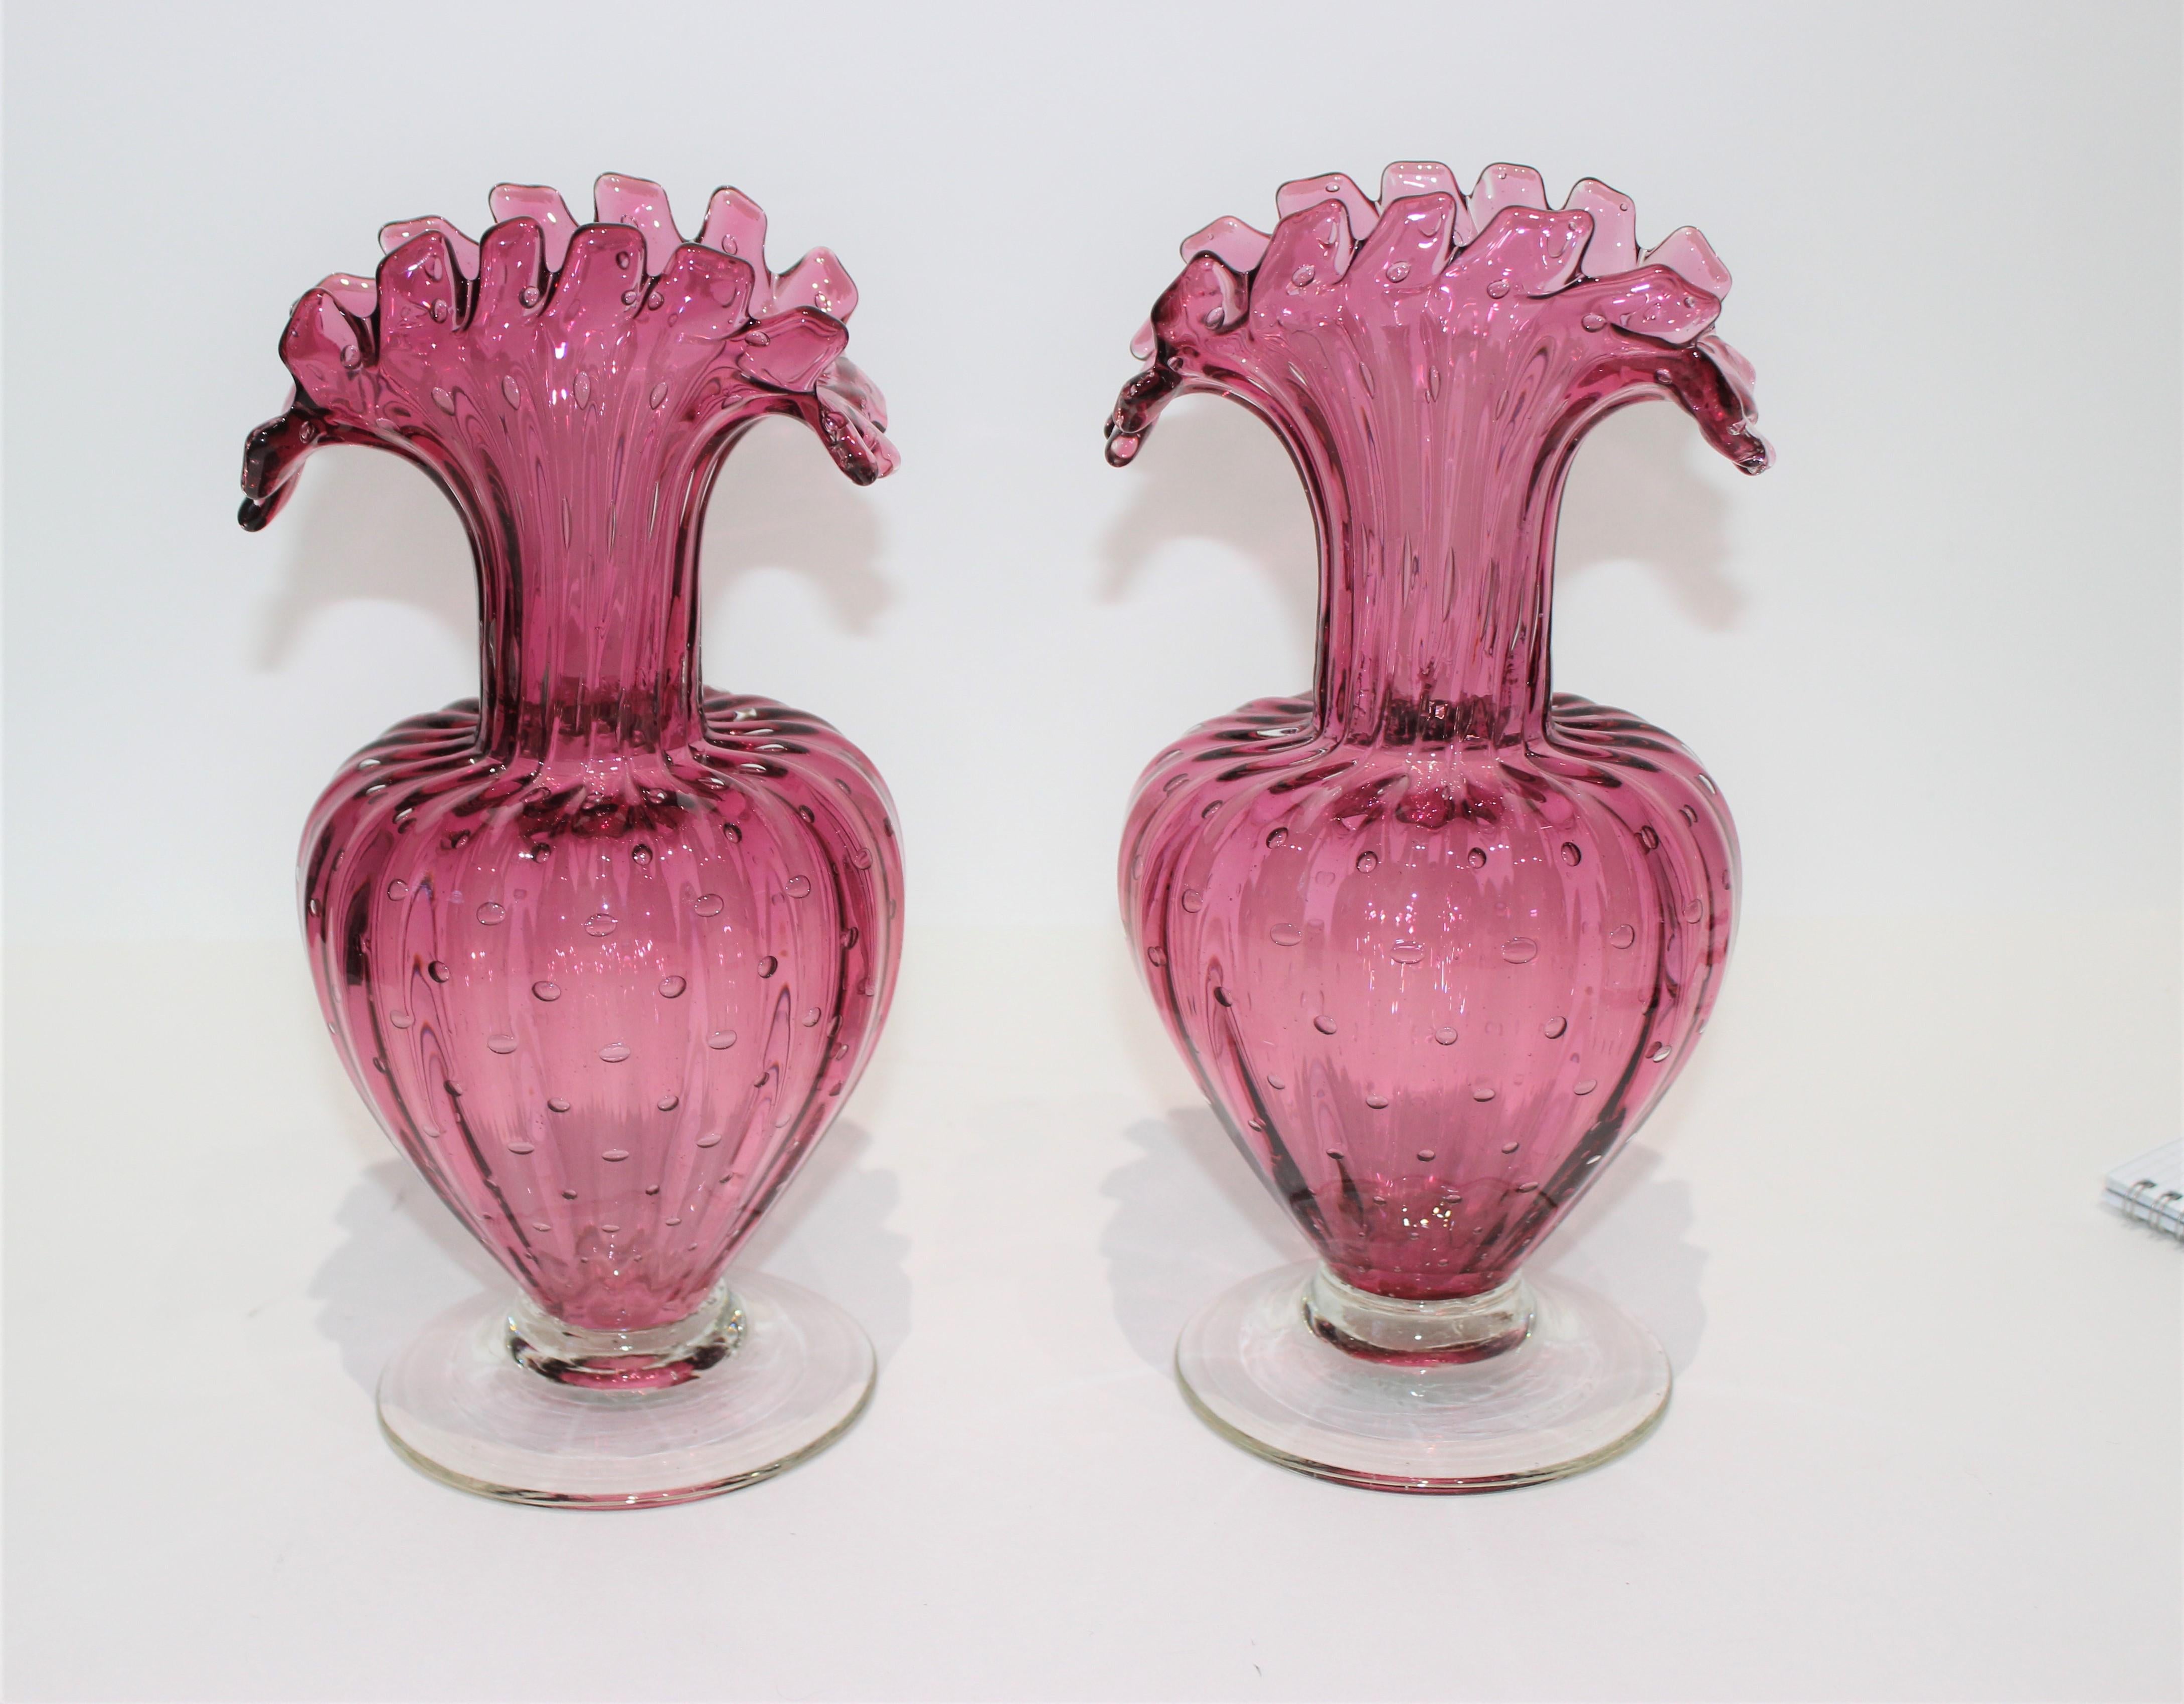 Murano ribbed bucillante controlled bubble raspberry pink vases with original Venice label, a pair. Acquired from a Palm Beach estate.

These are not exactly the same, being hand blown by the Murano artisans, but close enough for us to call them a